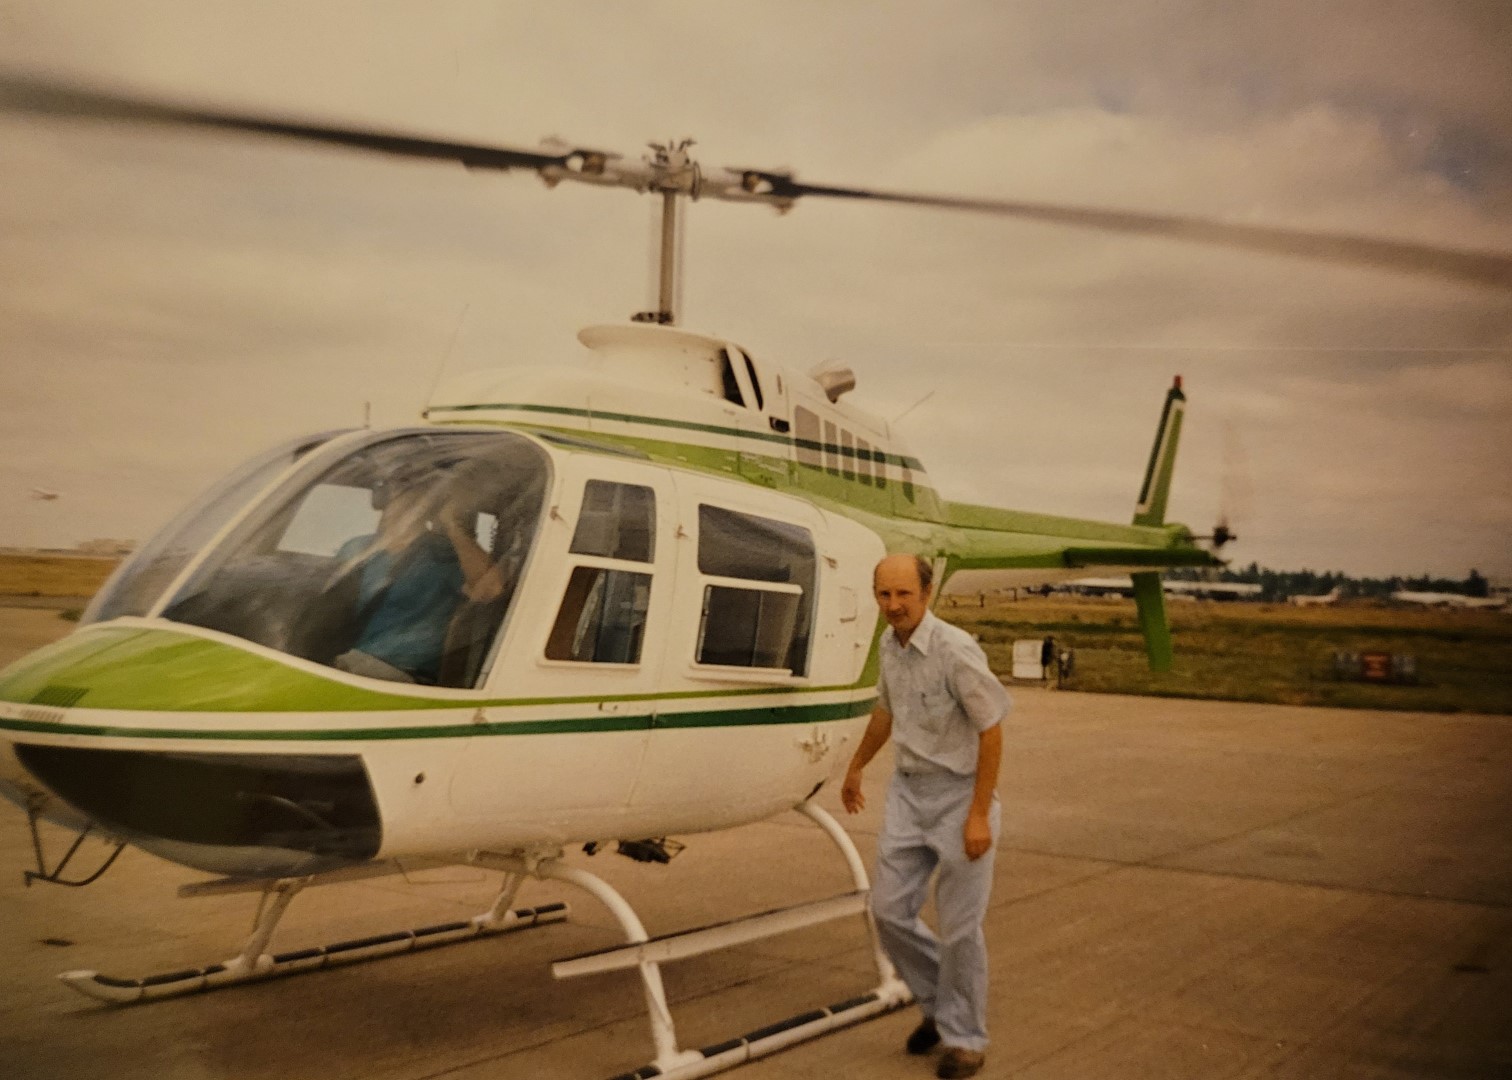 Image of Josh's uncle, Tom Dill, who worked in Weyerhaeuser aviation for 30 years before retiring.